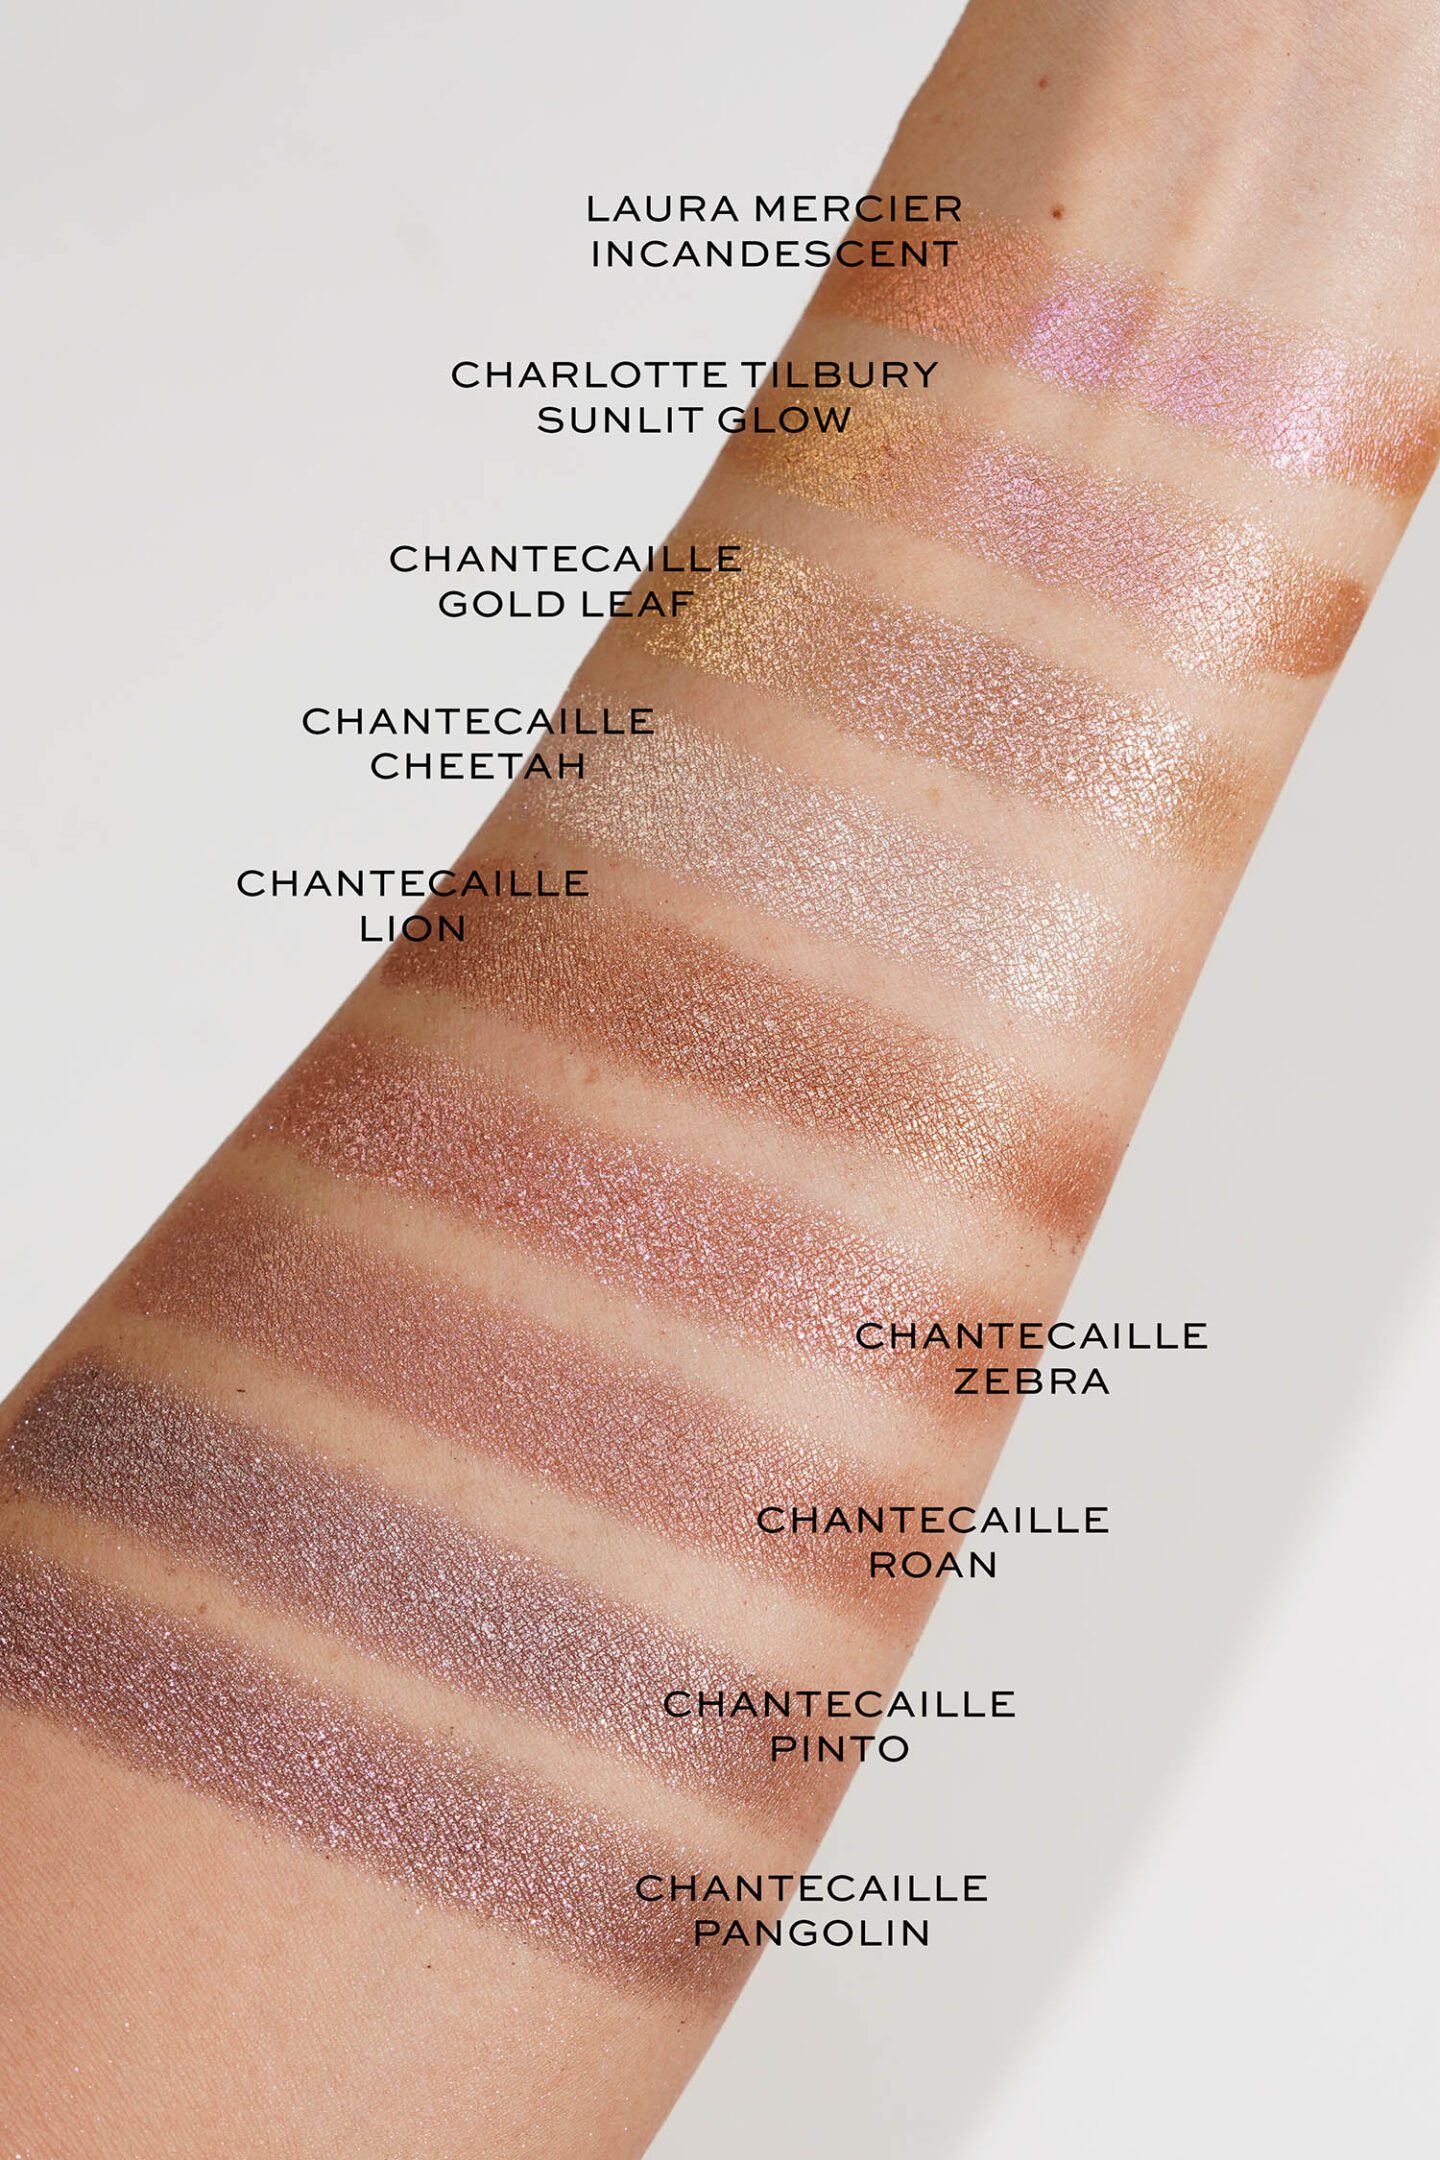 Chantecaille eyeshadow swatch comparisons